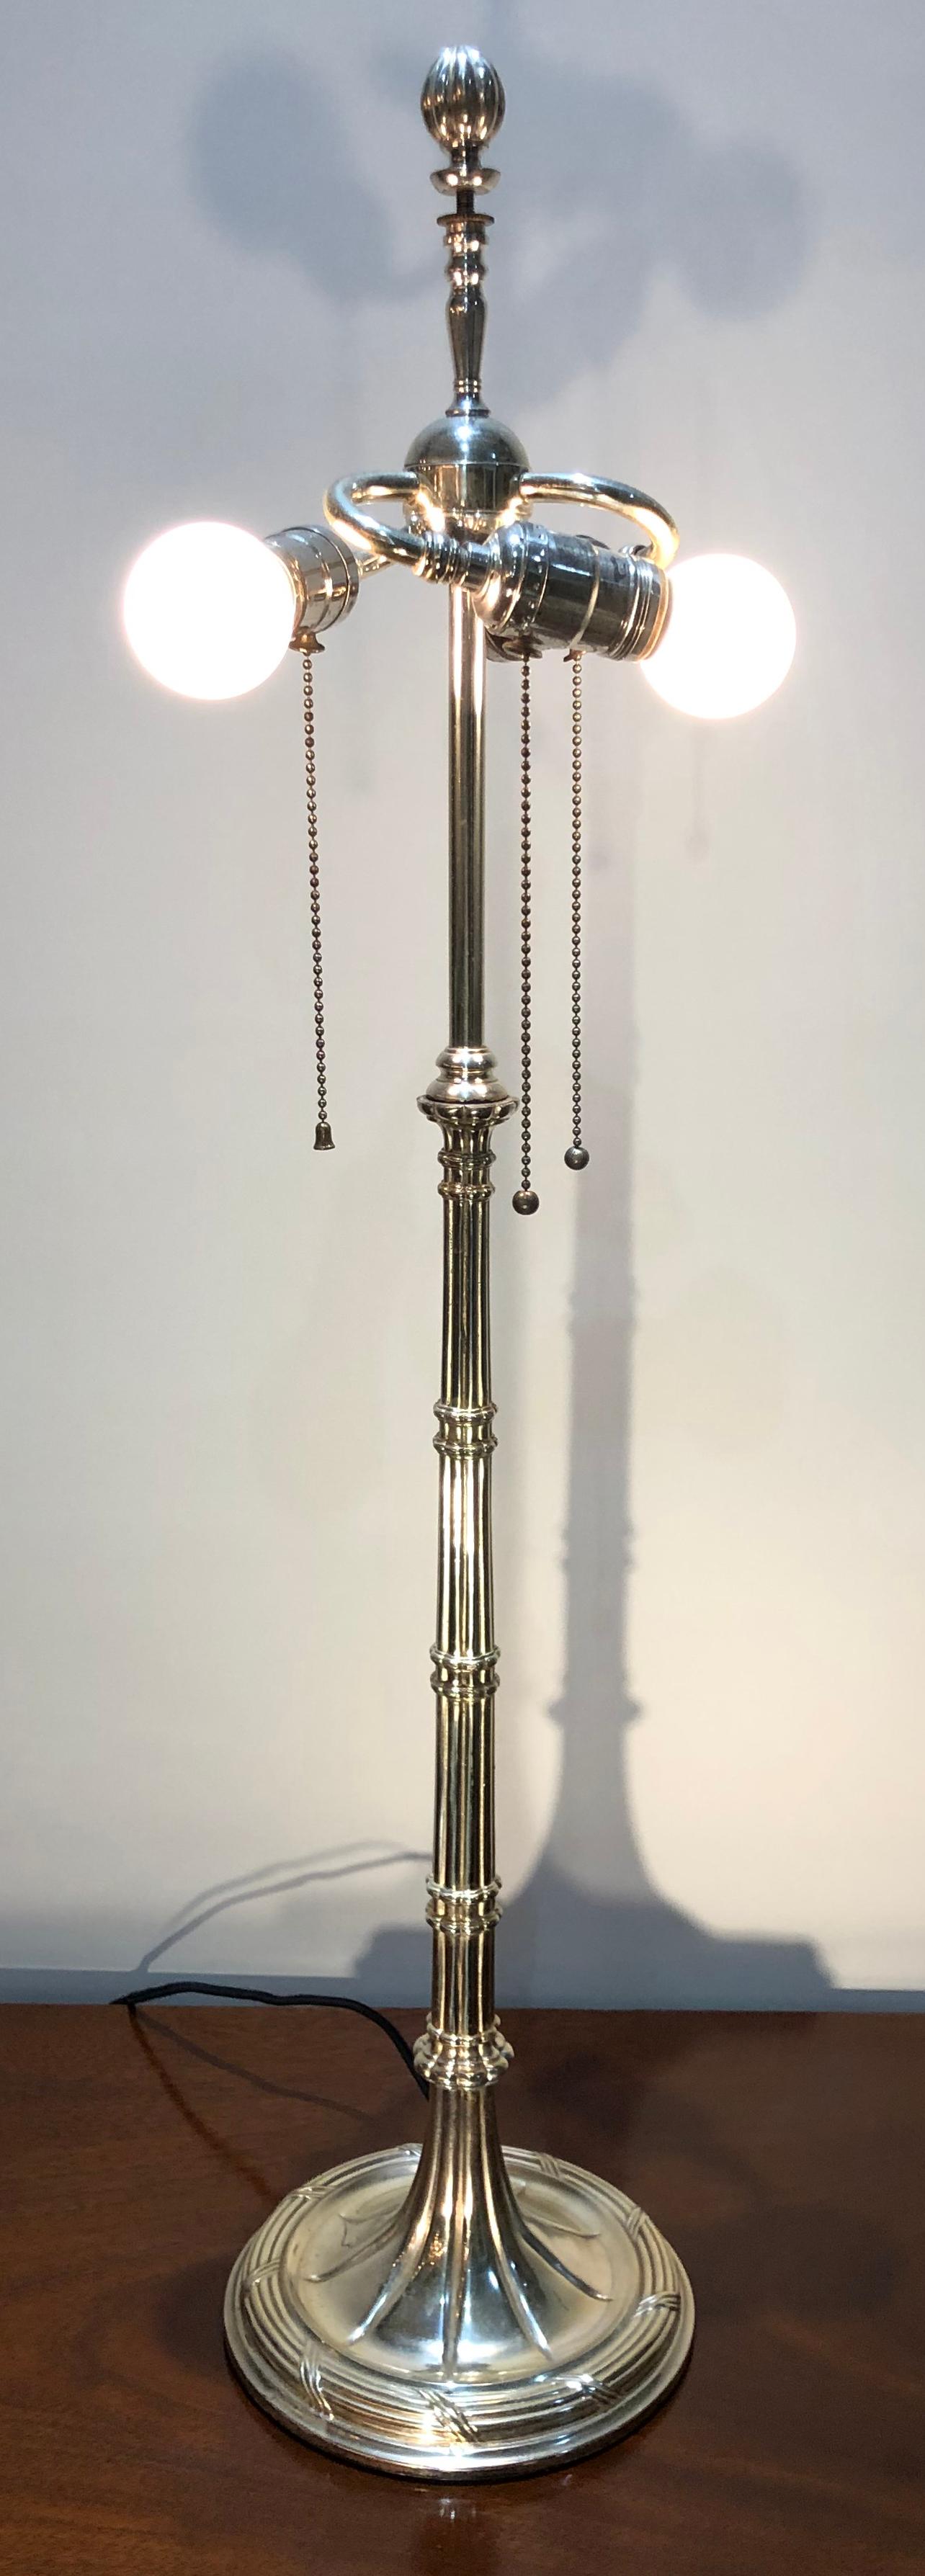 This early 20th century silver plate over bronze American table lamp with a faux bamboo design retains the original 3 light cluster. The lamp has been rewired with UL listed sockets.